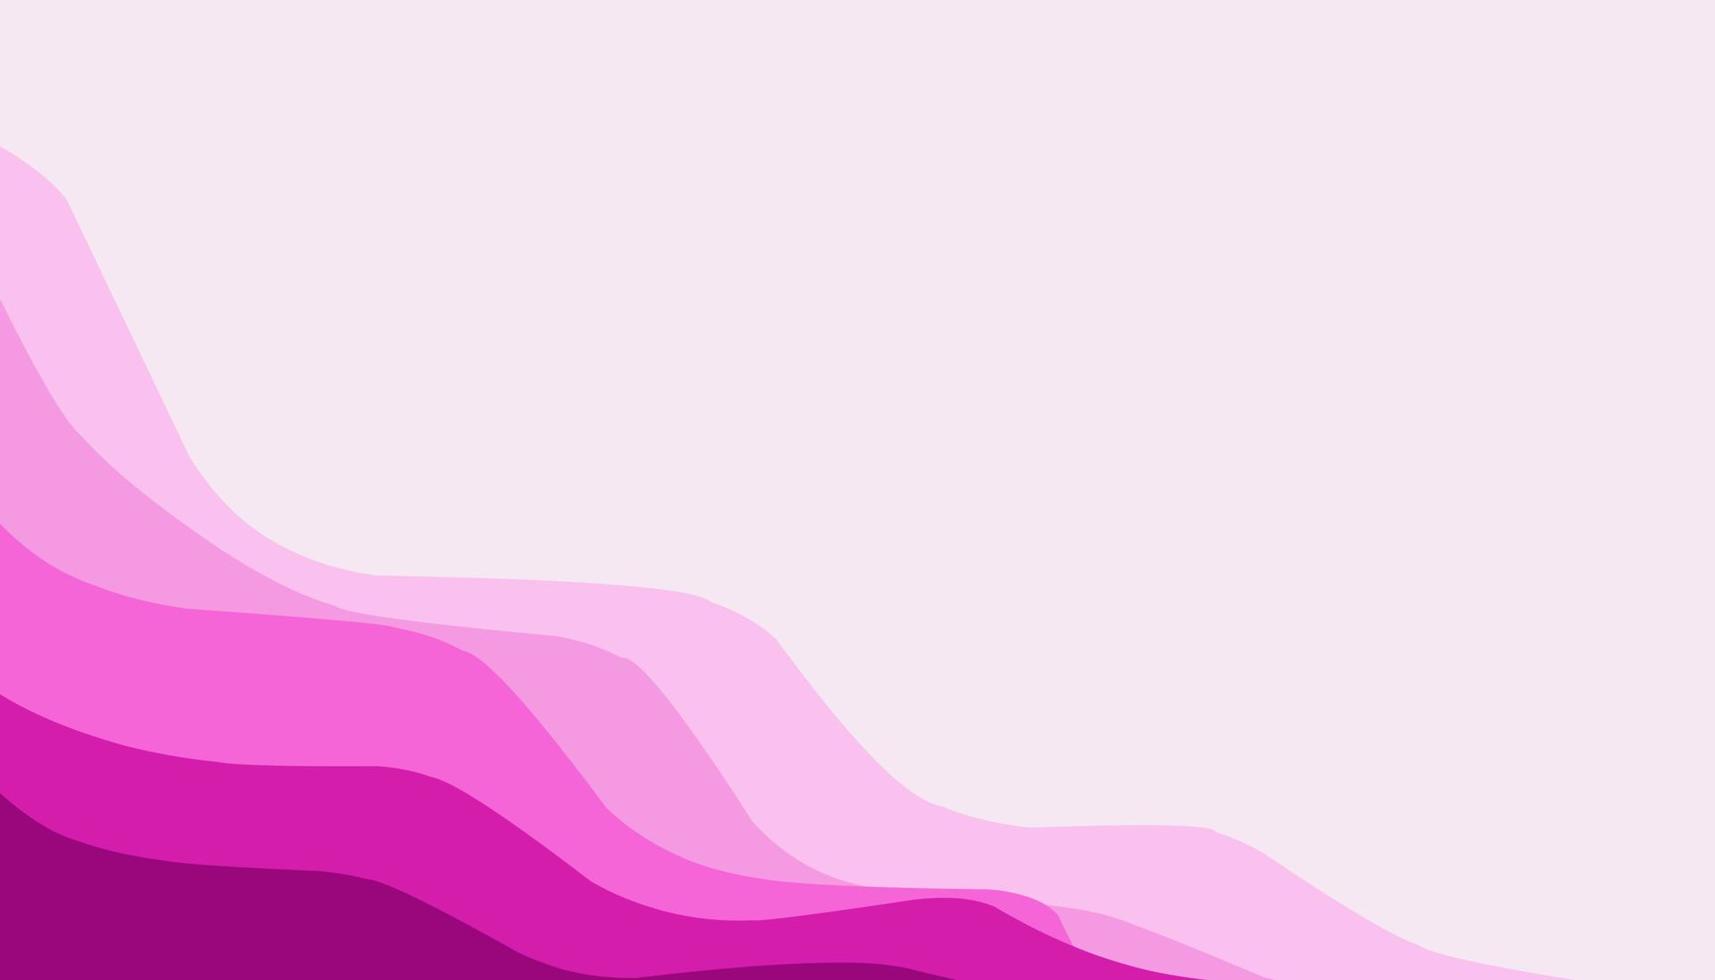 Abstract background illustration of pink waves vector